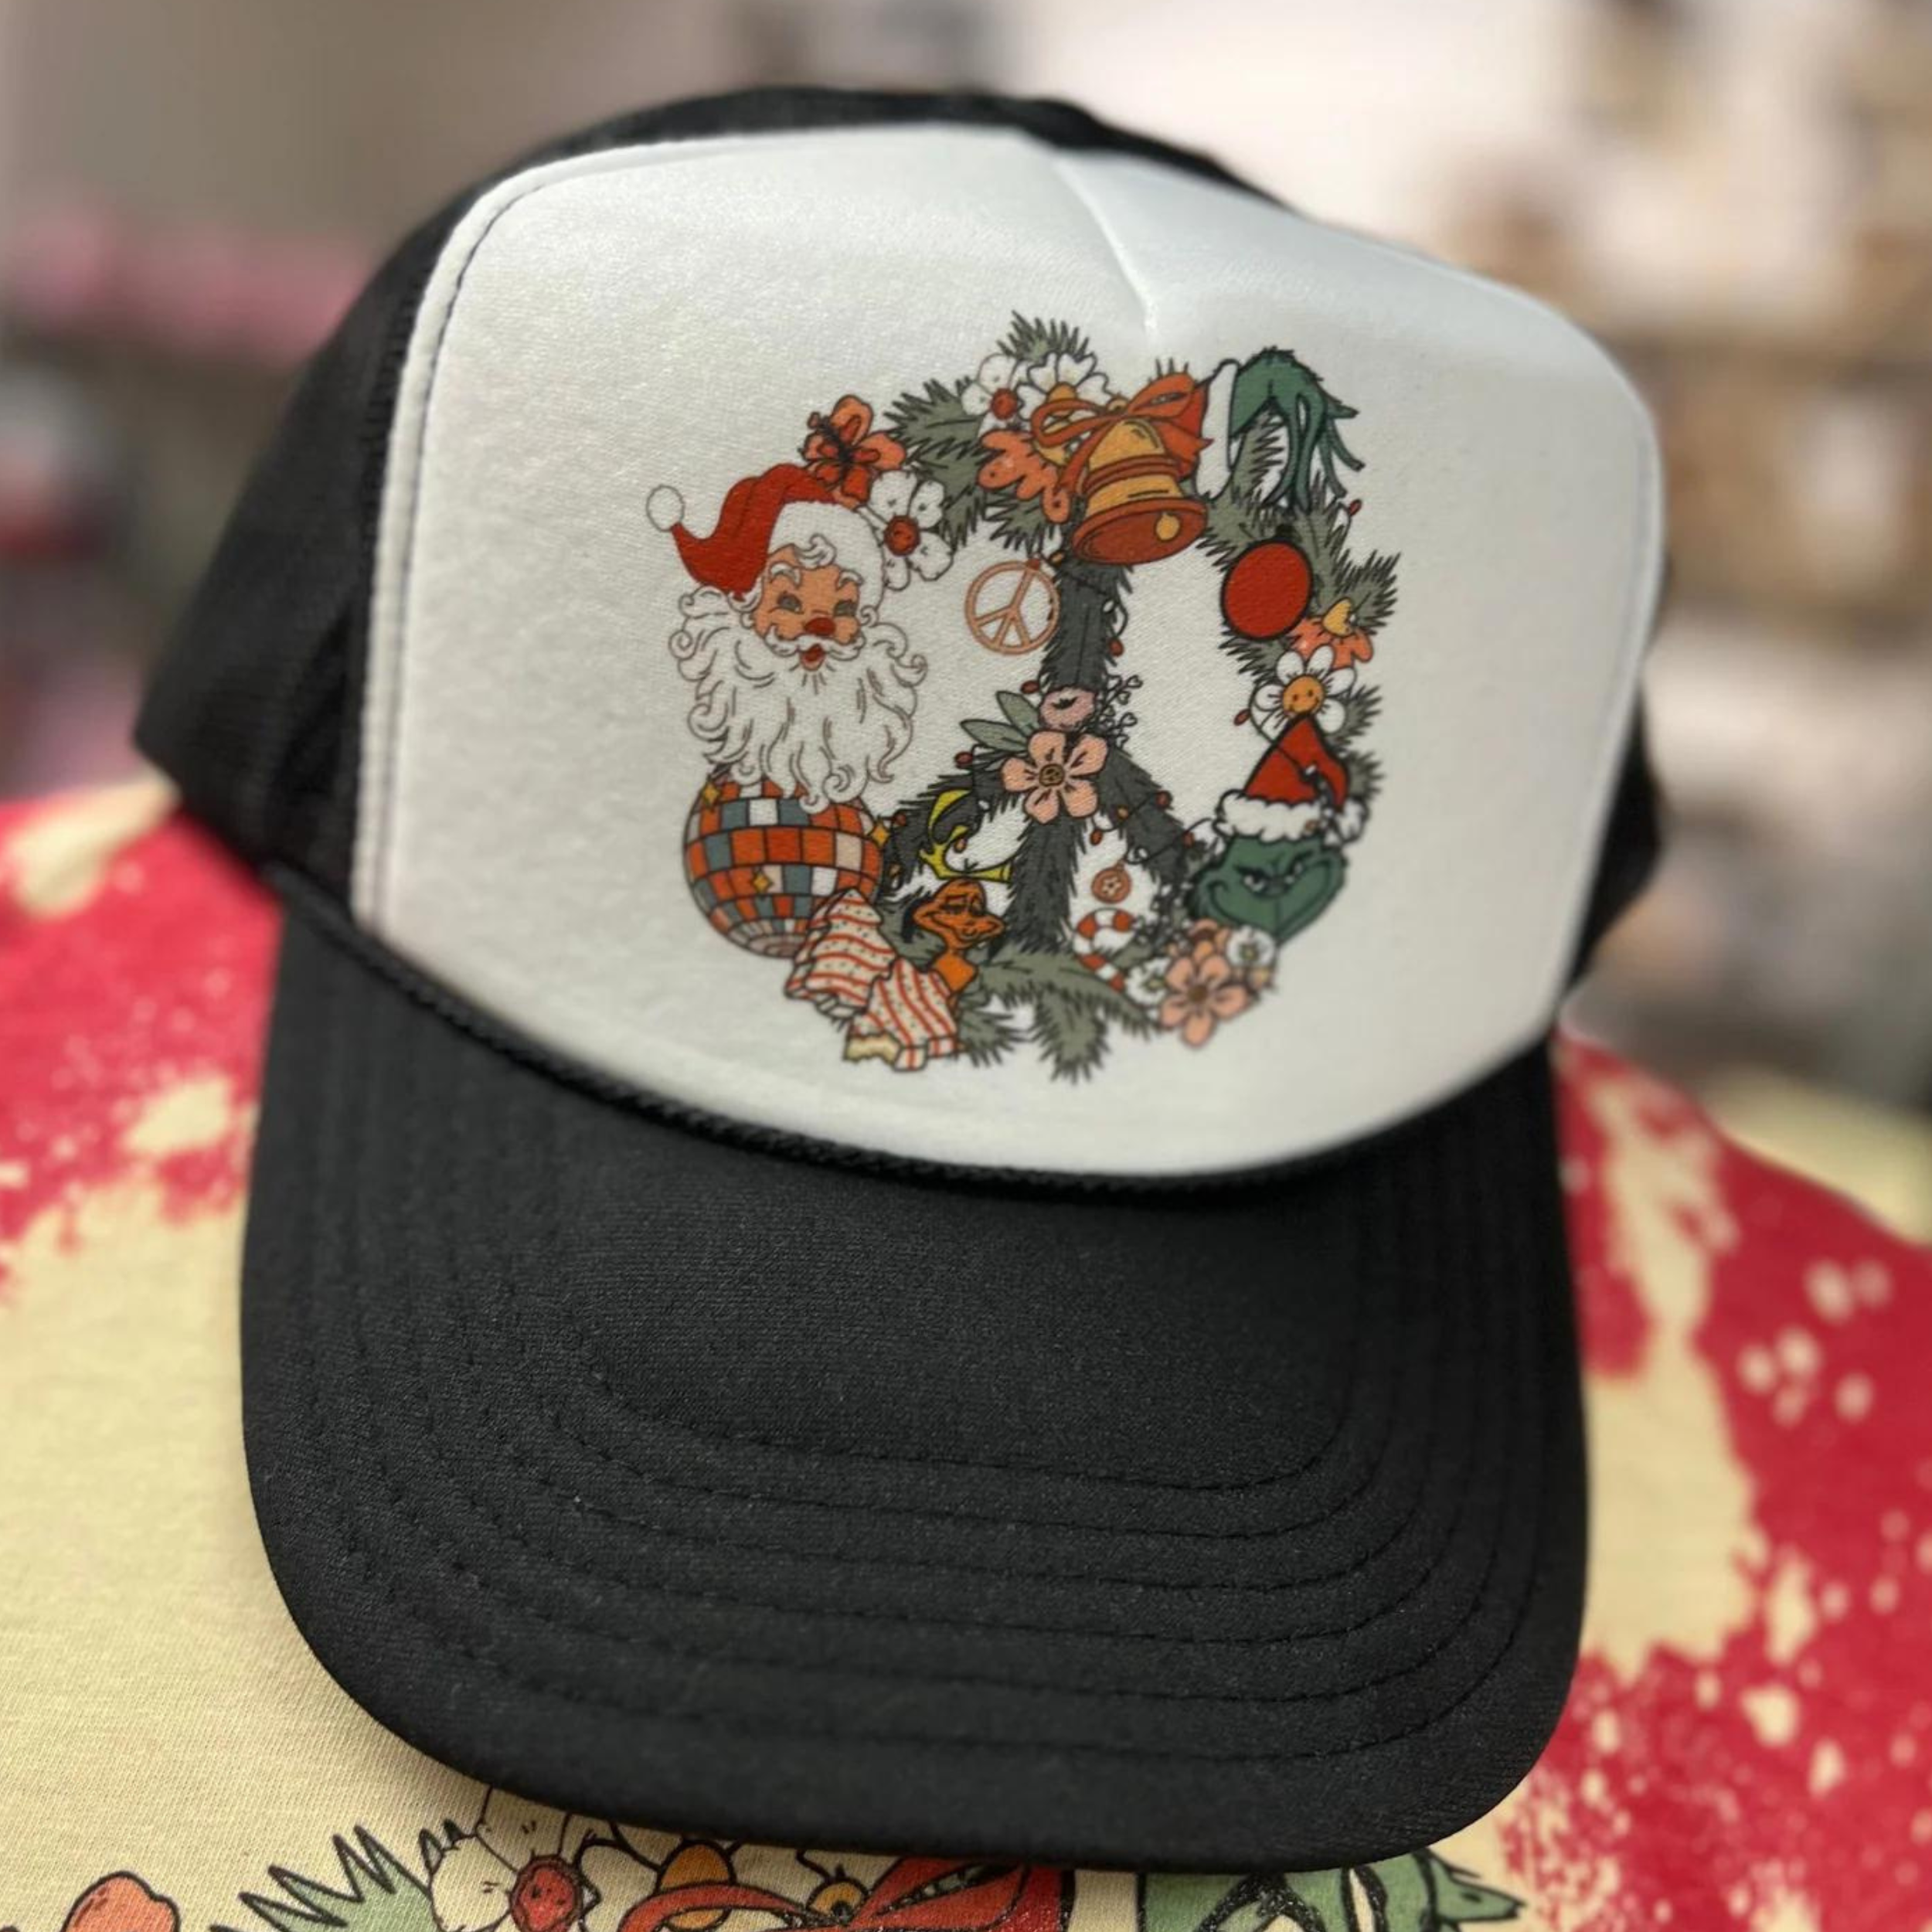 Photo features a black and white trucker hat with a peace shaped wreath intertwined with Santa and the Grinch.